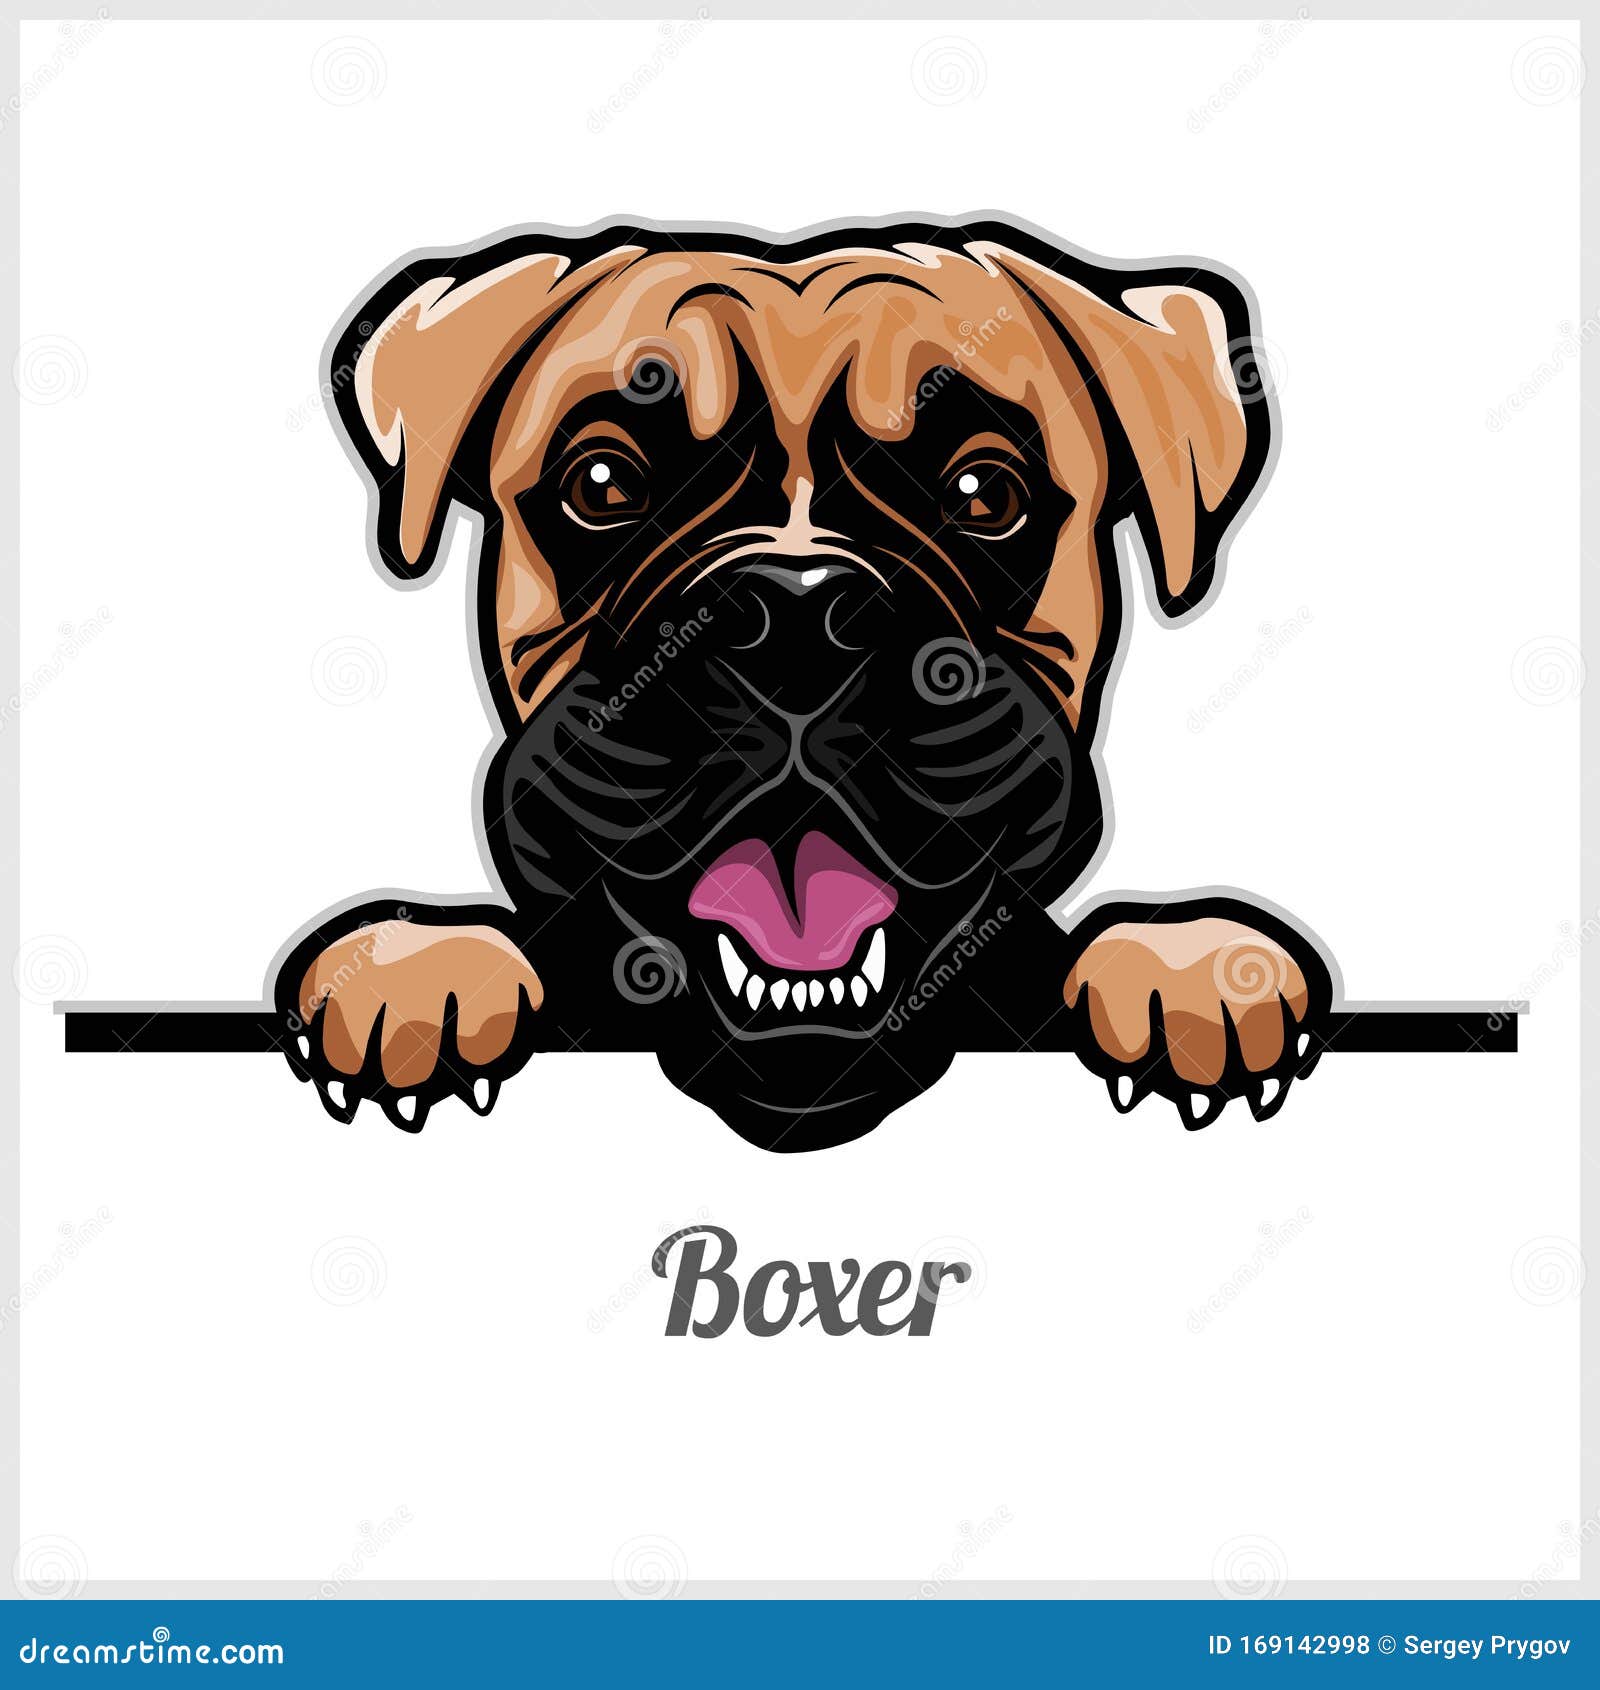 Boxer - Peeking Dogs - Breed Face Head Isolated on White Stock Vector